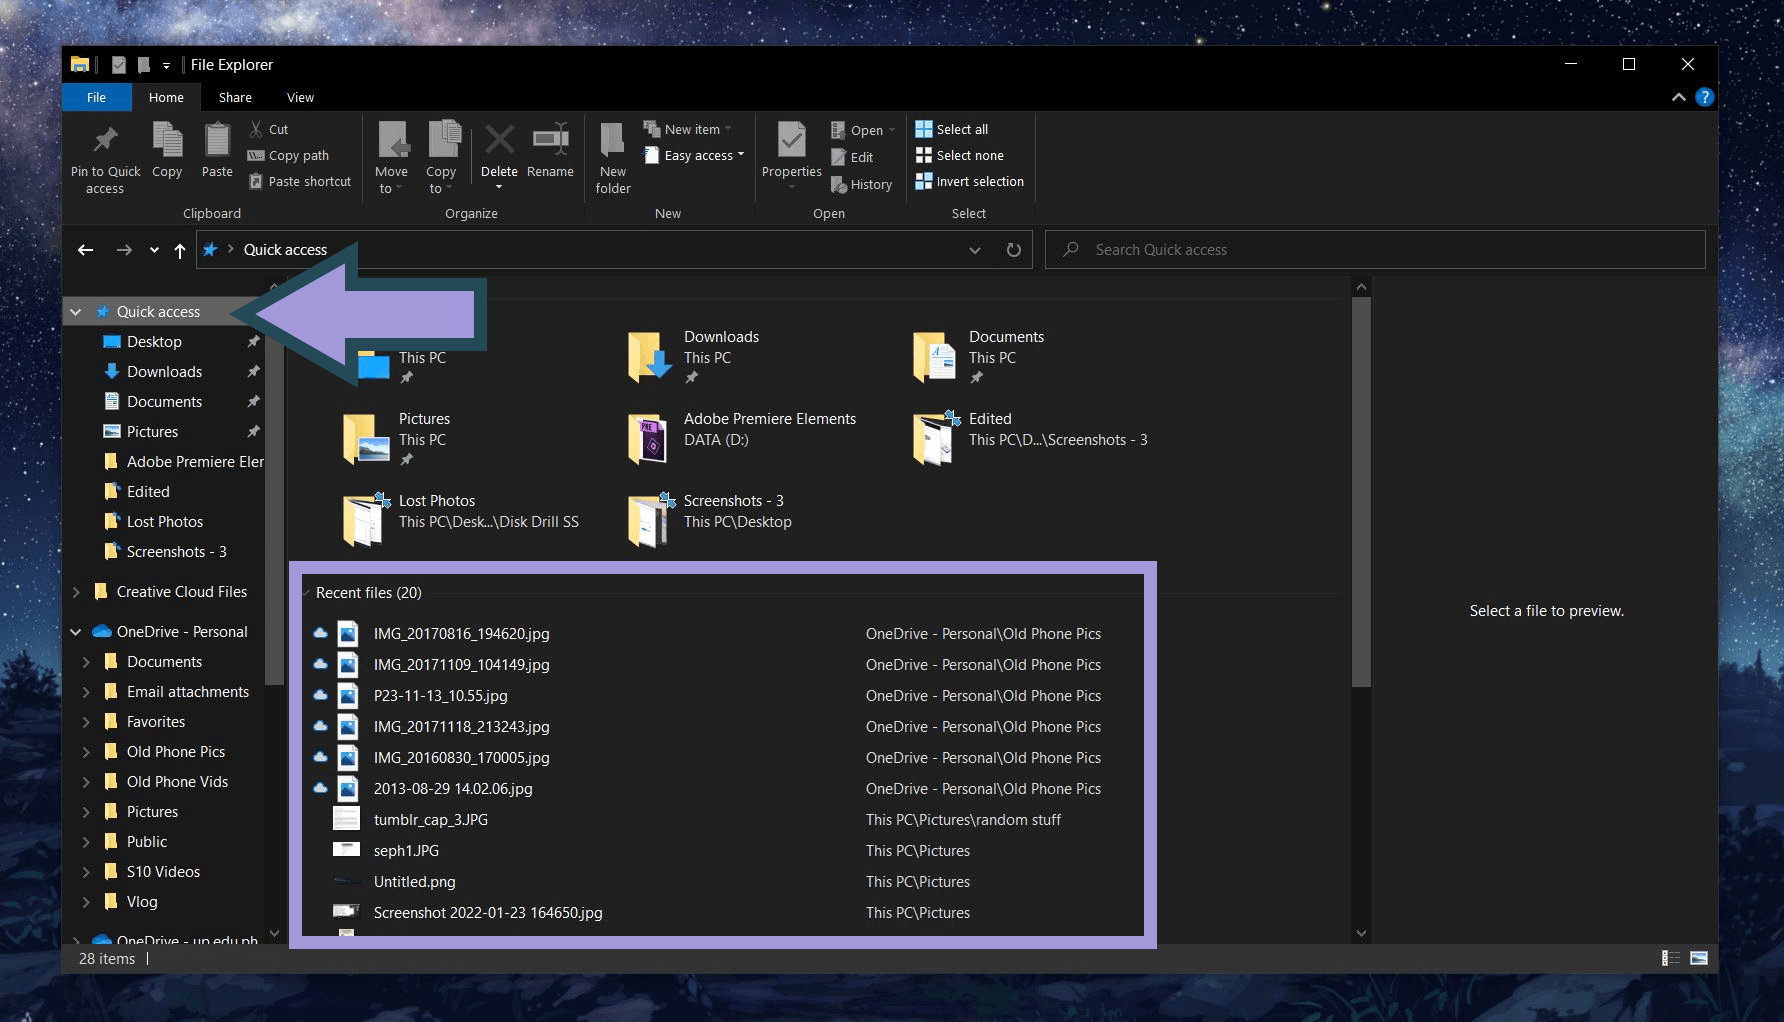 viewing recent files on file explorer